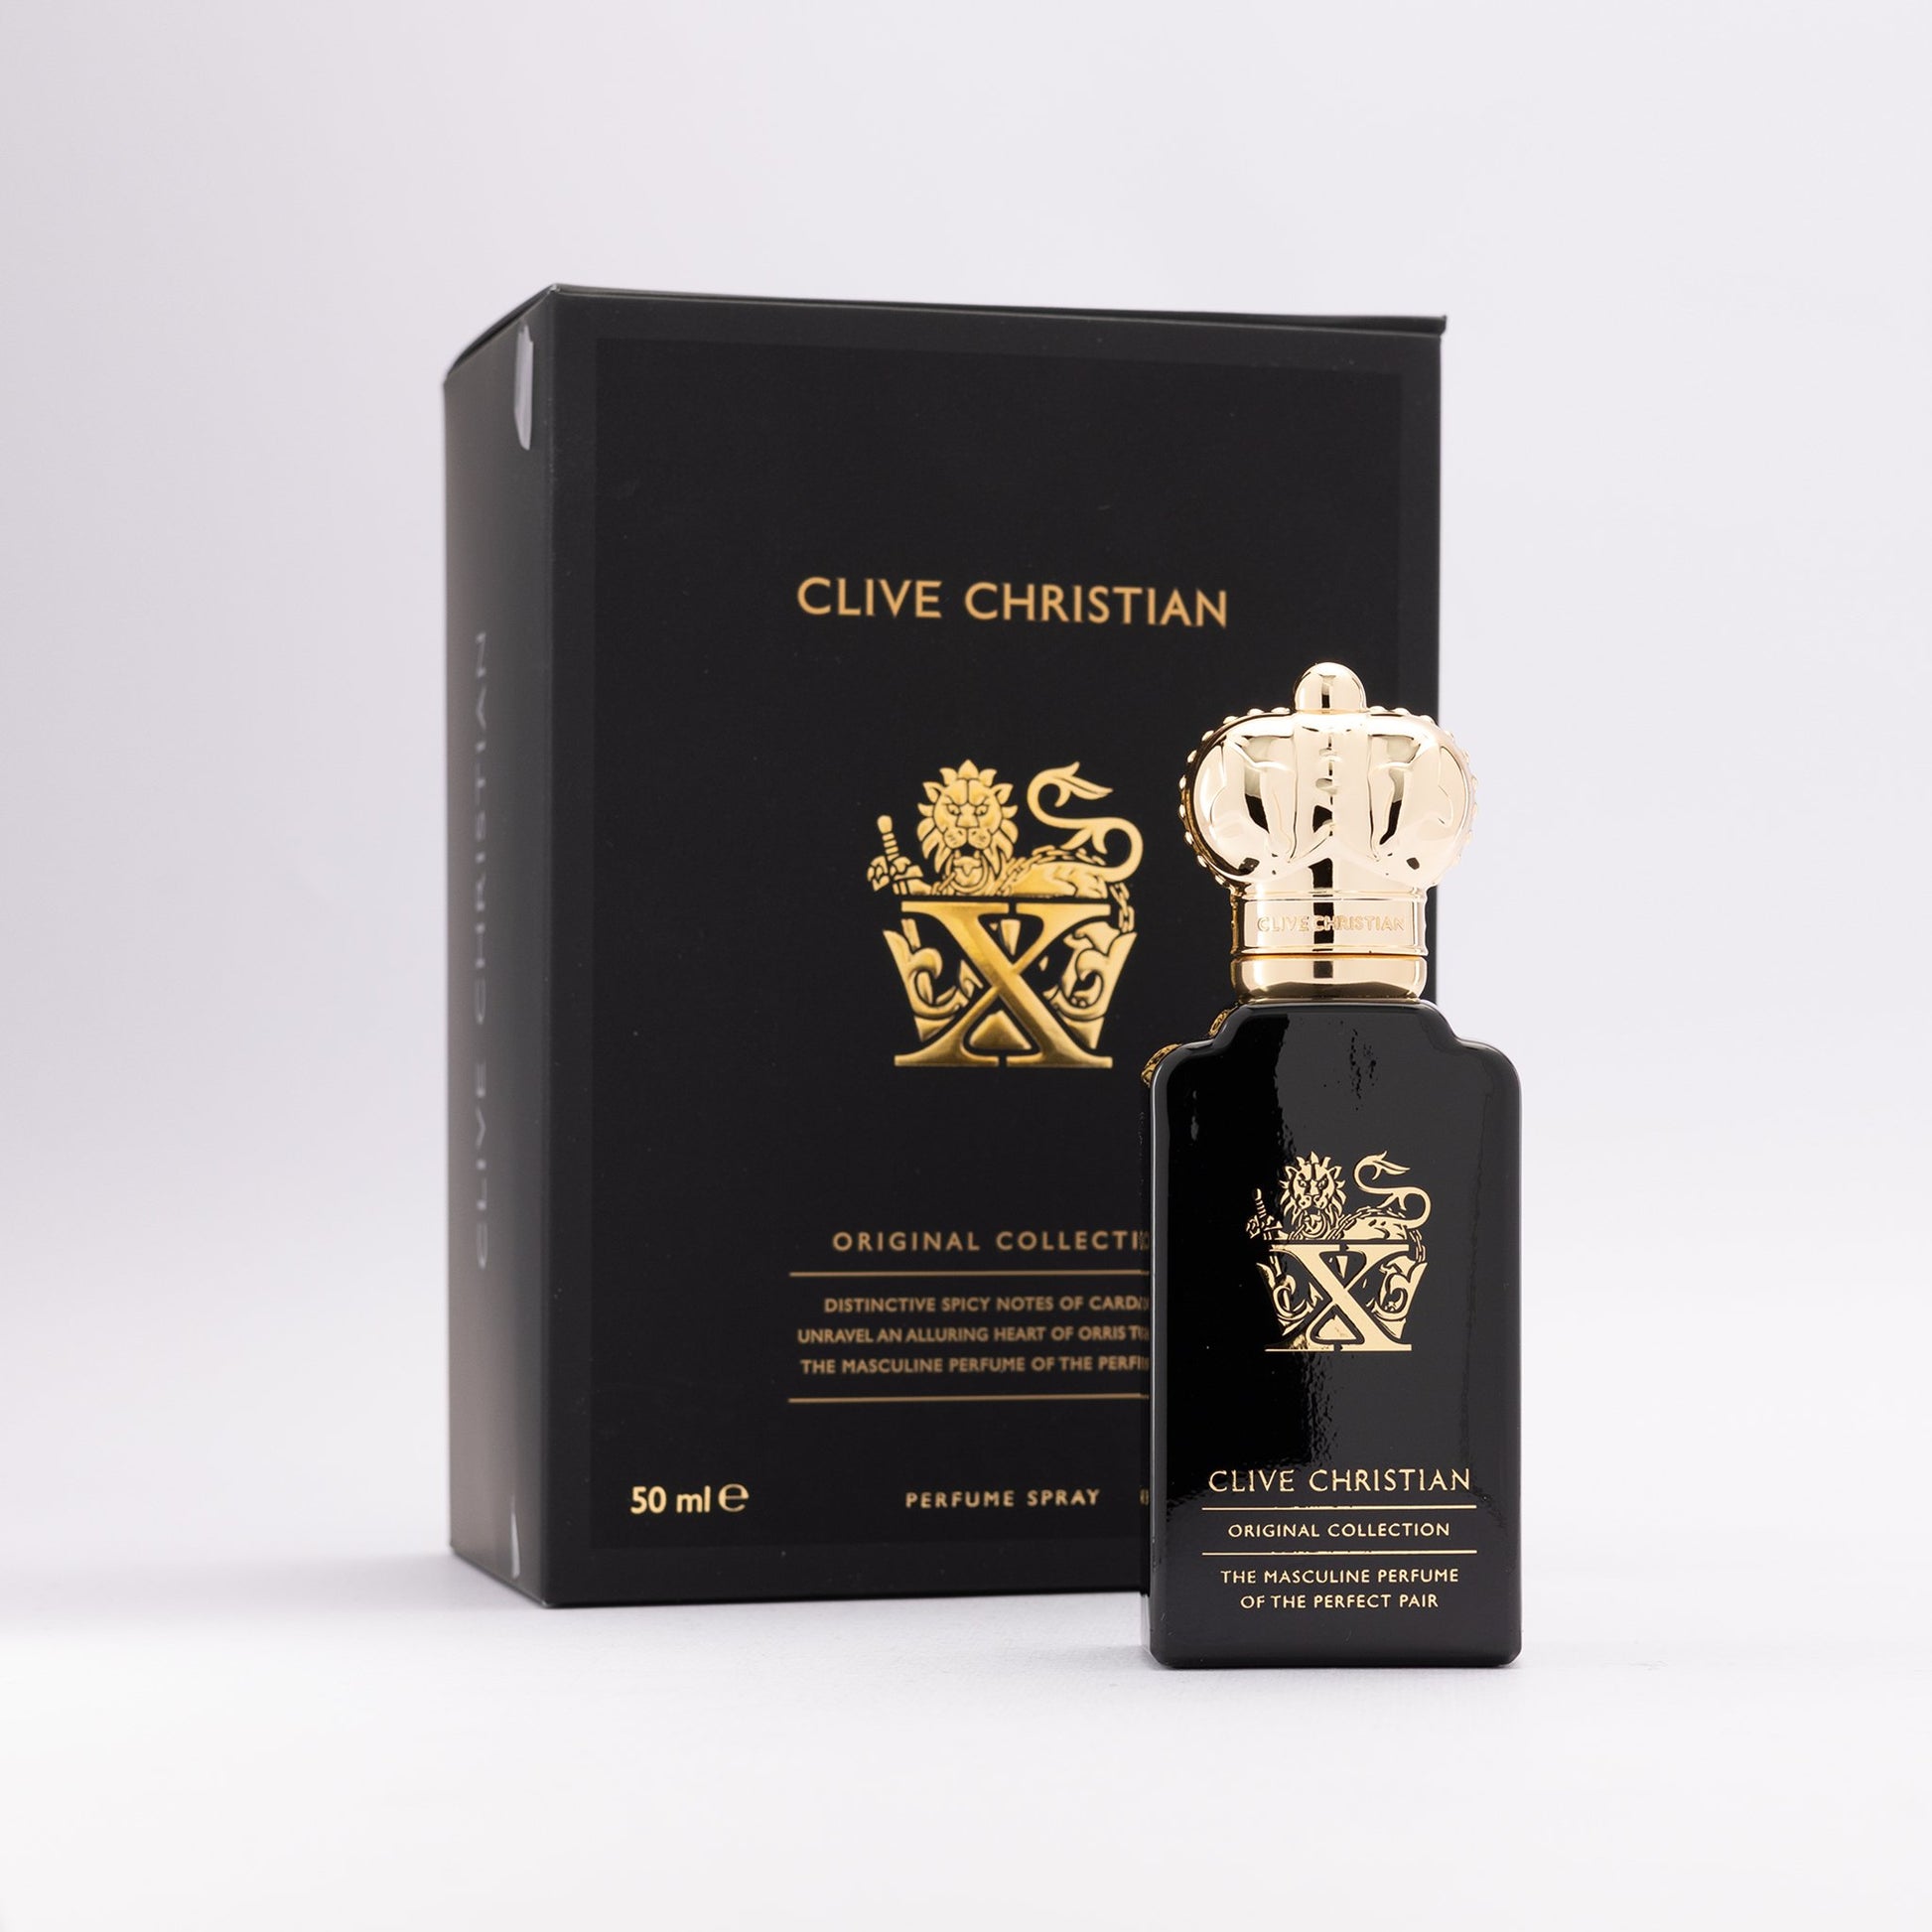 X - The Masculine Perfume of the Perfect Pair – OTRO perfume concept